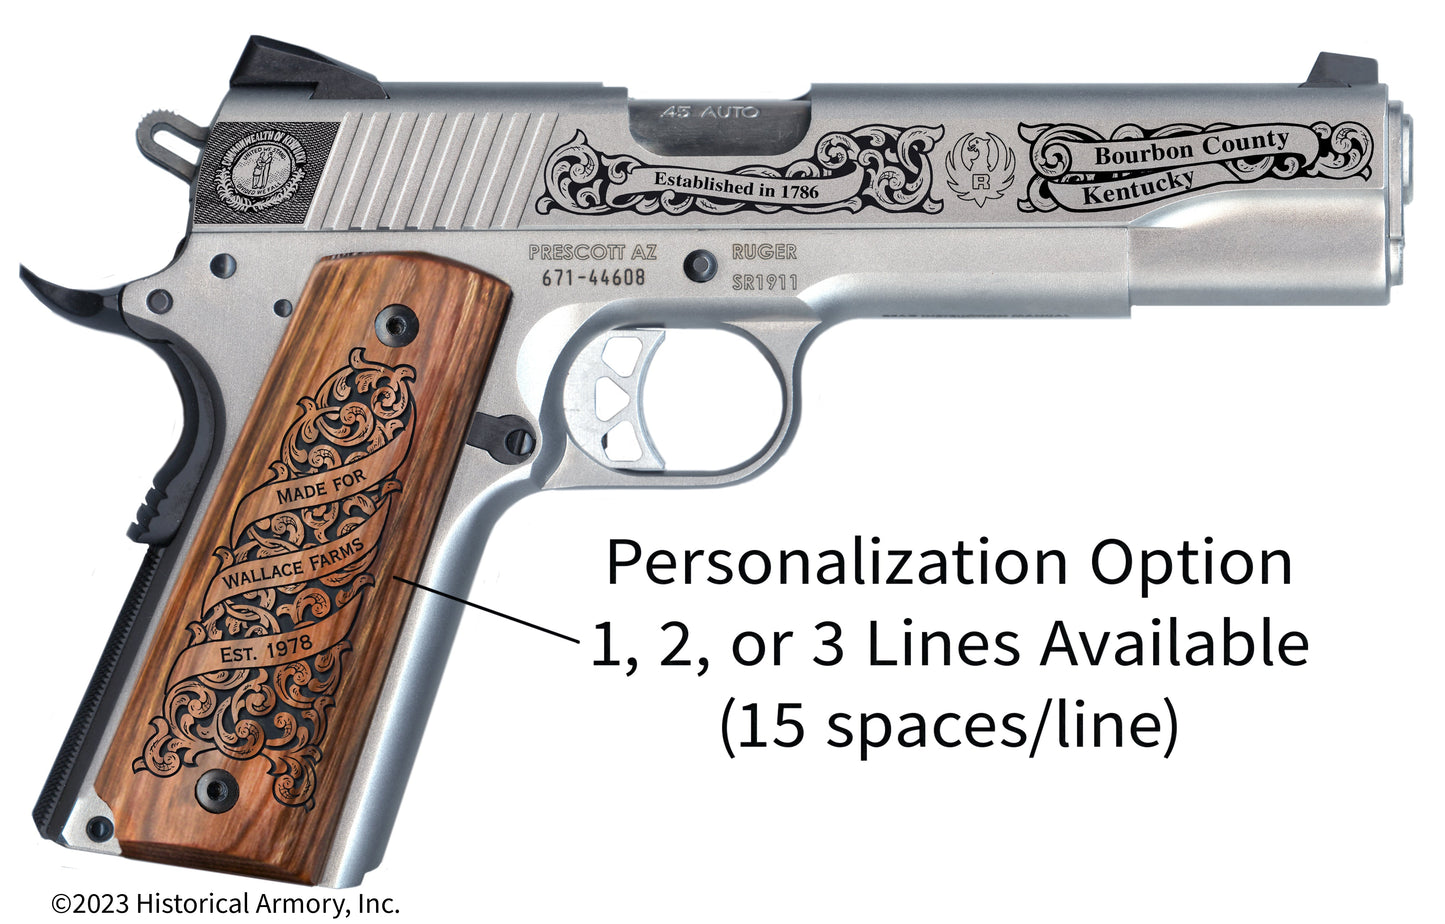 Bourbon County Kentucky Personalized Engraved .45 Auto Ruger 1911